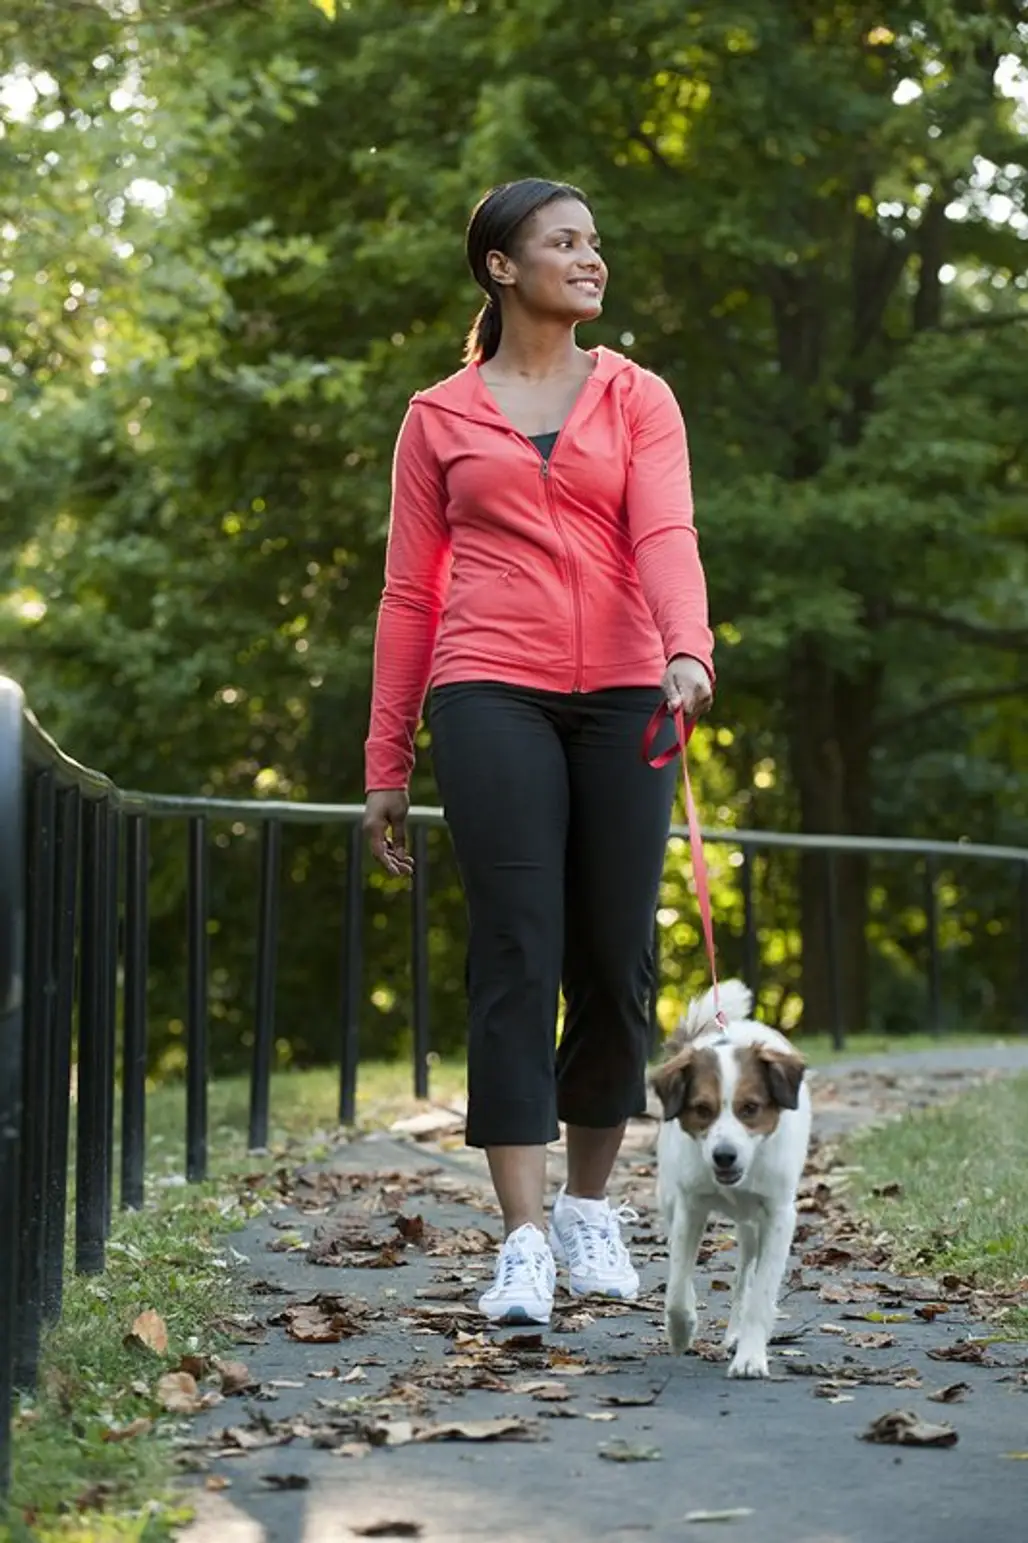 Walk Your Pooch for 25 Minutes